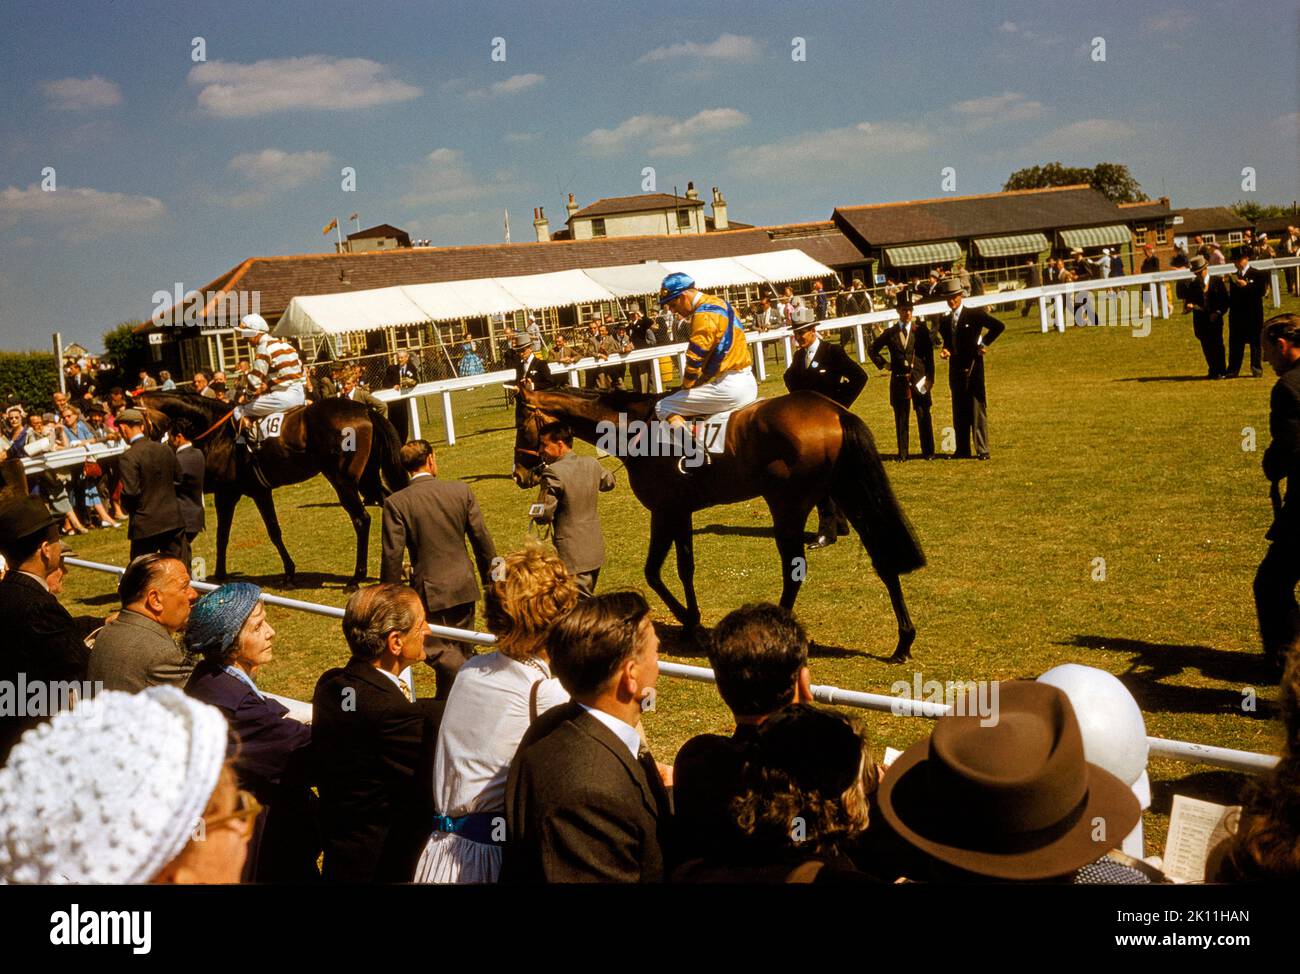 English Derby, Epsom Downs Racecourse, Epsom, Surrey, England, UK, Toni Frissell Collection, June 3, 1959 Stock Photo